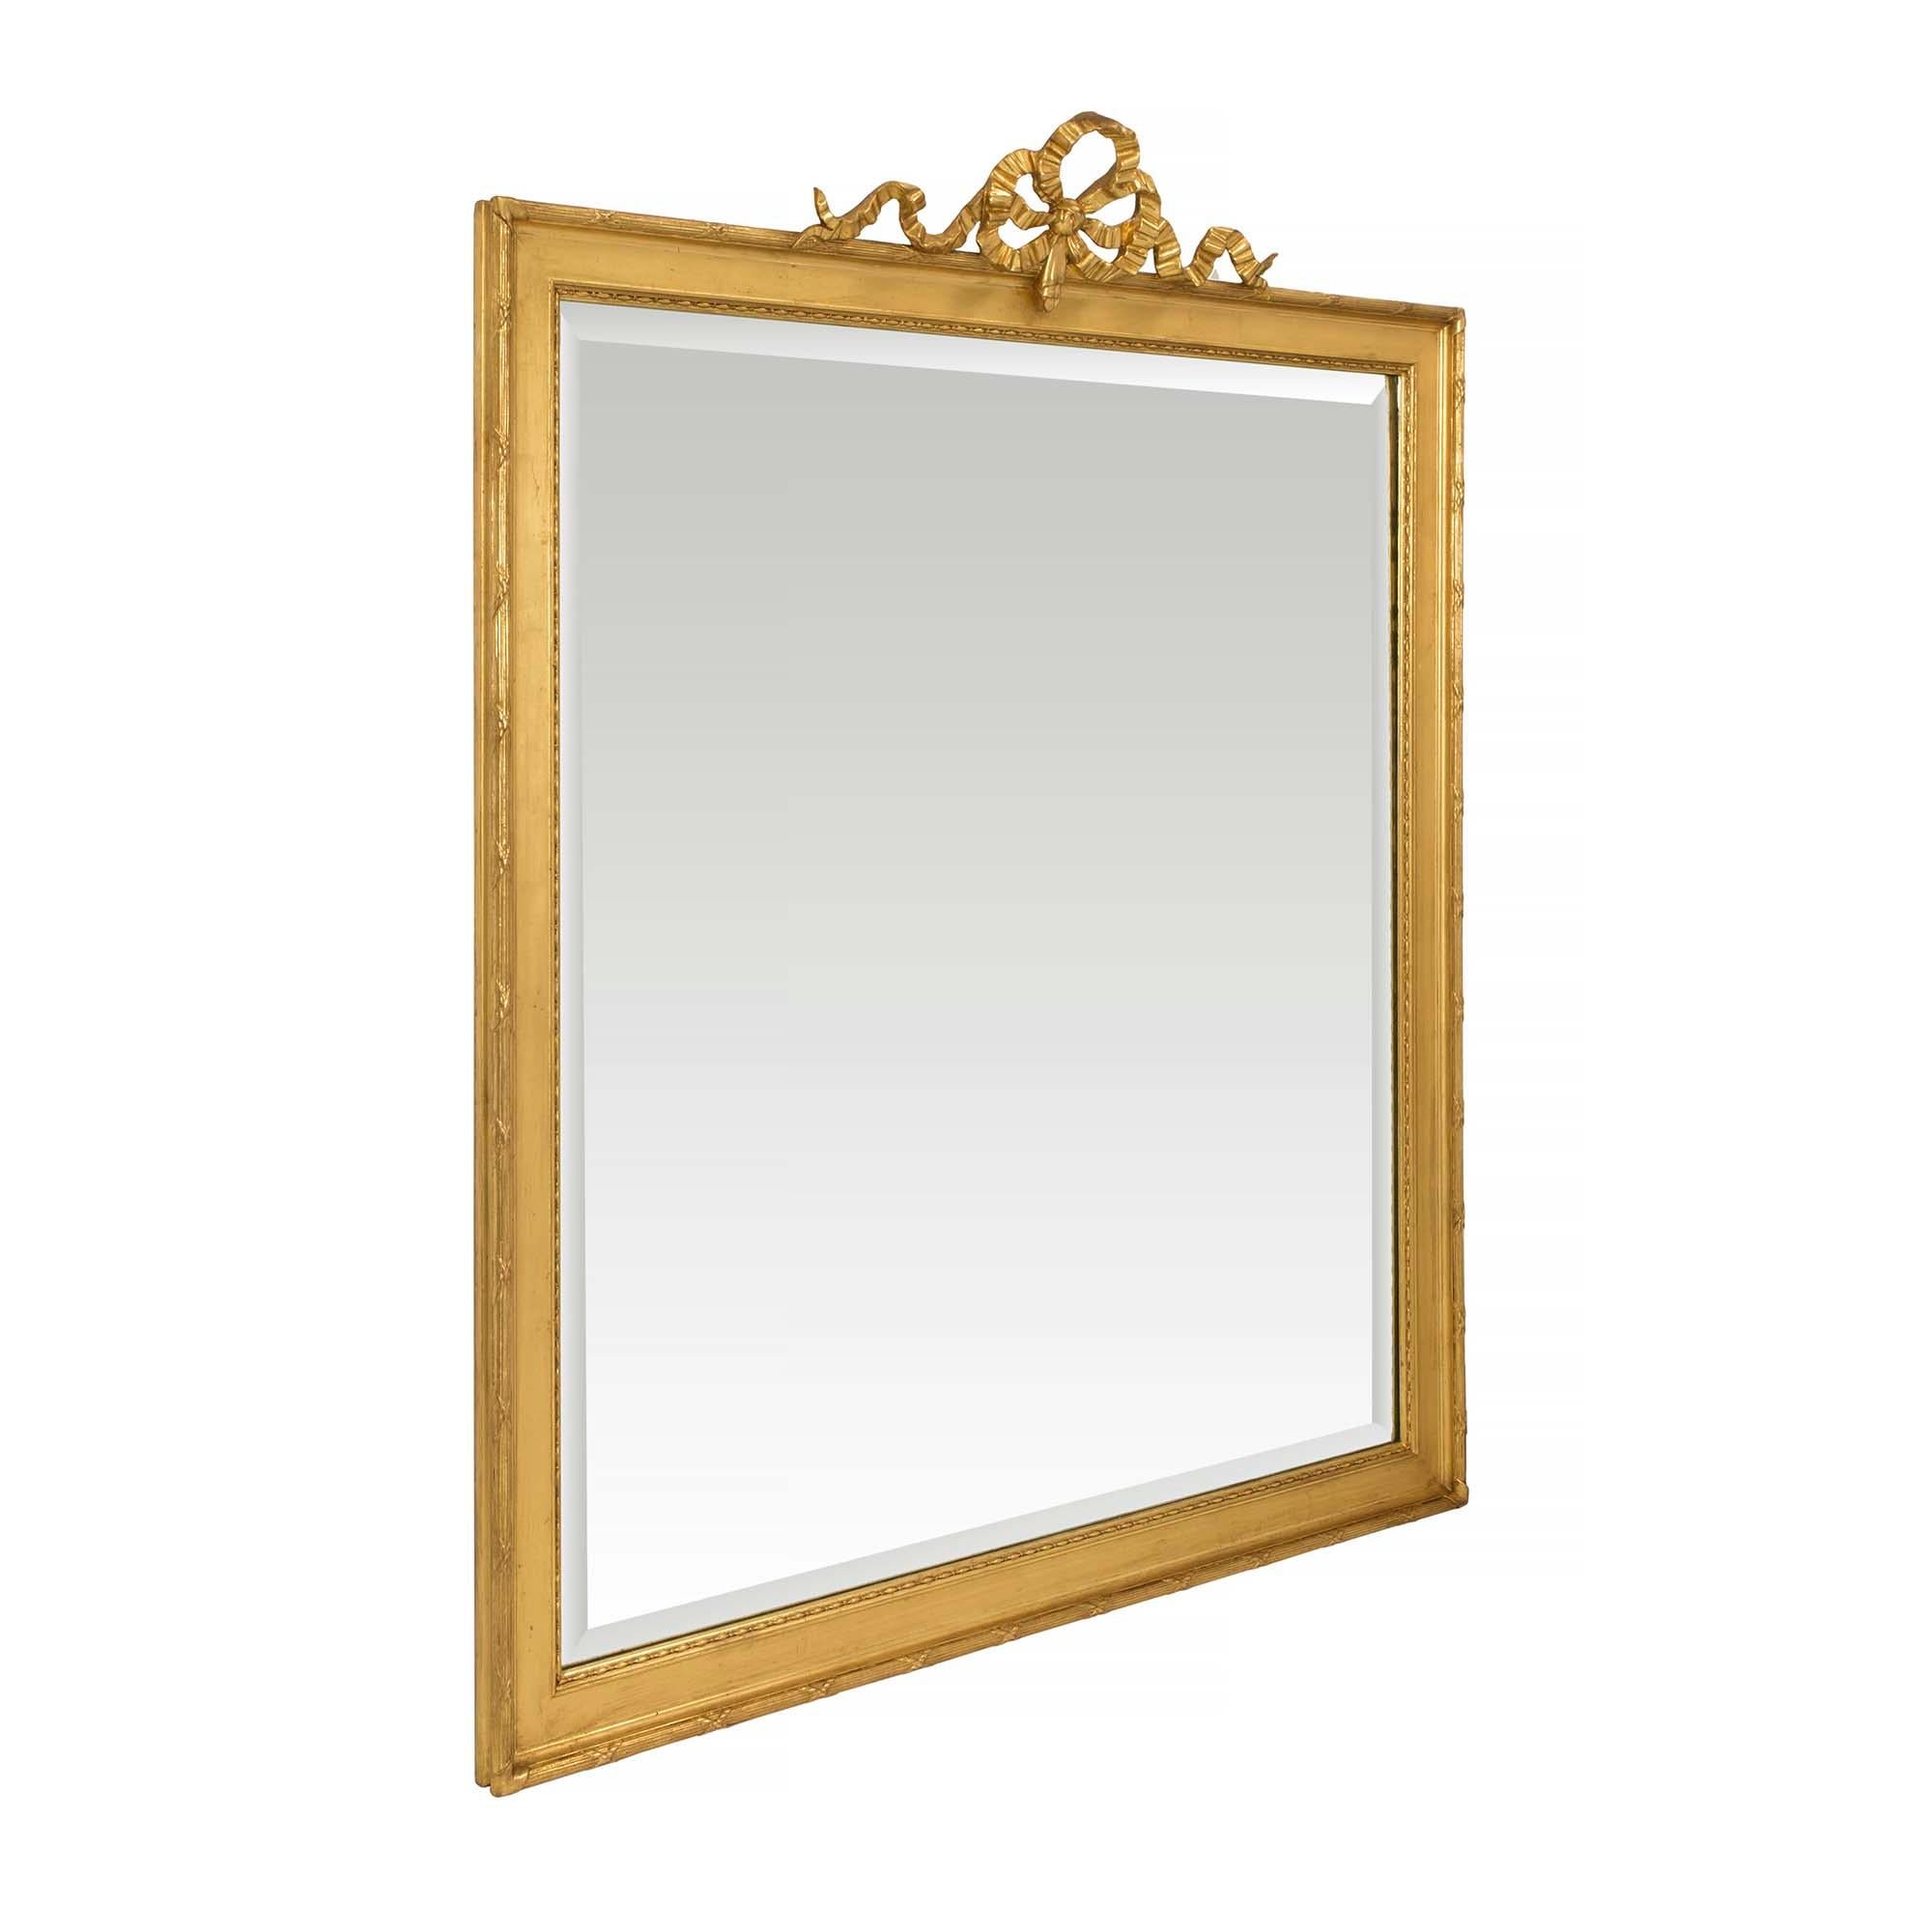 An elegant French 19th century Louis XVI st. rectangular giltwood mirror. The beveled mirror plate is framed within a fine carved pattern and a mottled giltwood frame in a beautiful satin and burnished finish. At the border is a most decorative tied